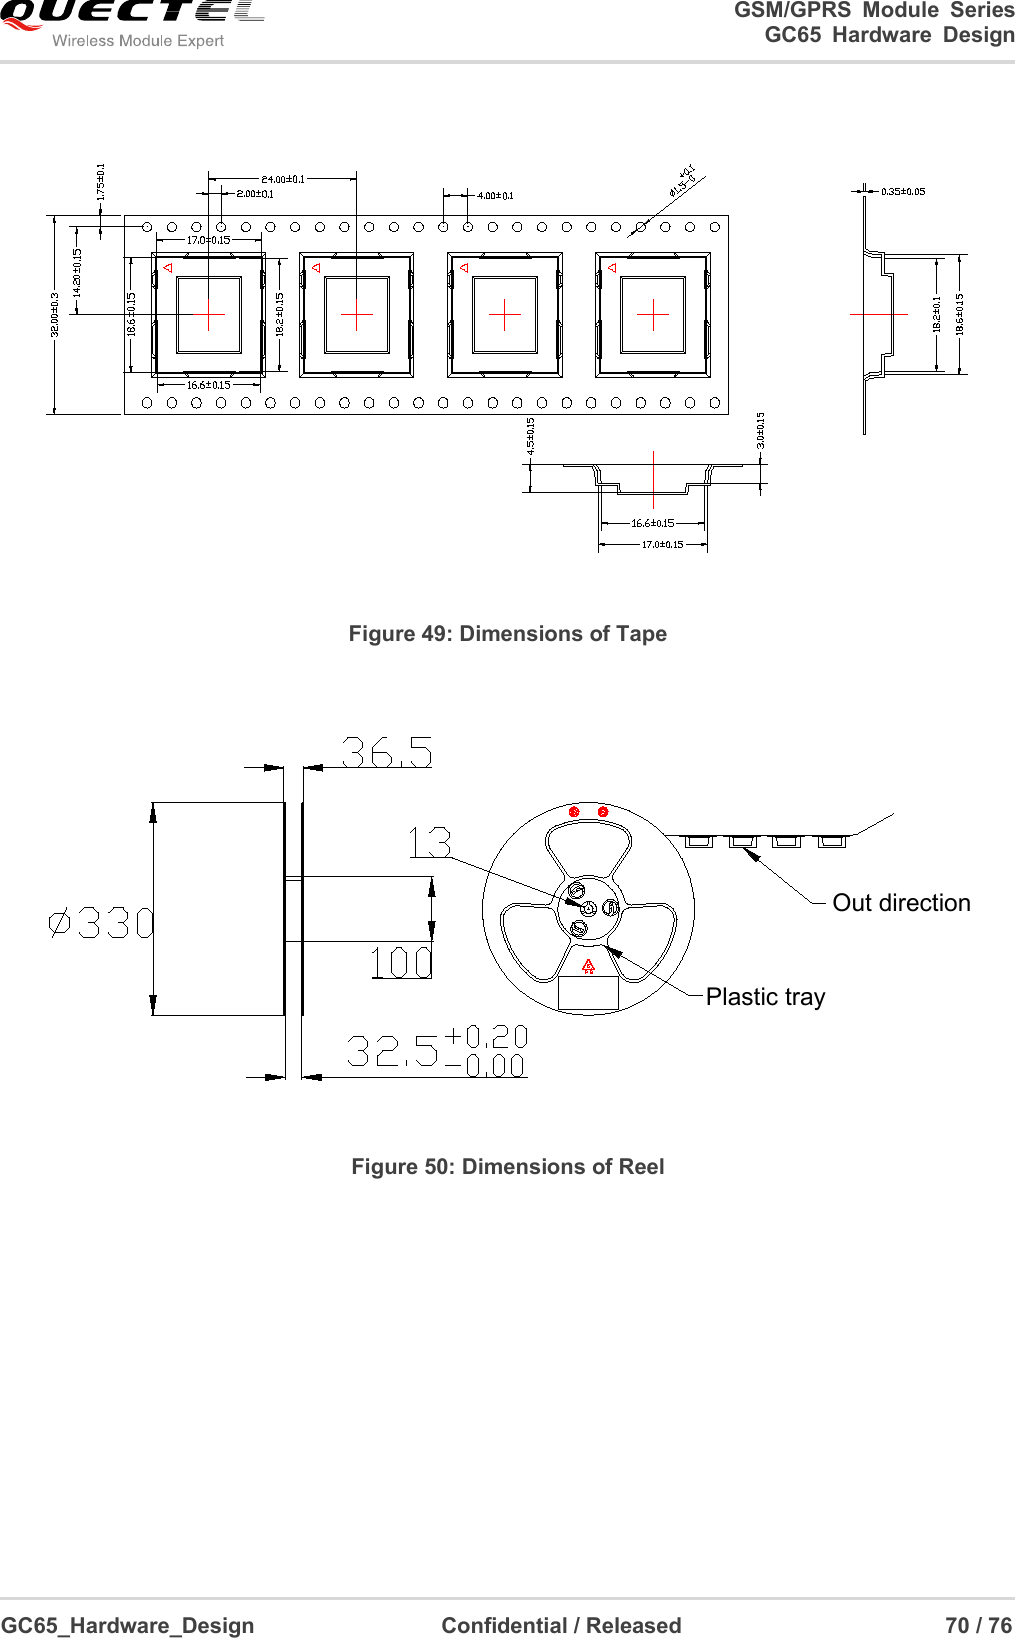                                                                          GSM/GPRS  Module  Series                                                                 GC65 Hardware Design  GC65_Hardware_Design                                  Confidential / Released                                                70 / 76       Figure 49: Dimensions of Tape Plastic trayOut direction Figure 50: Dimensions of Reel    